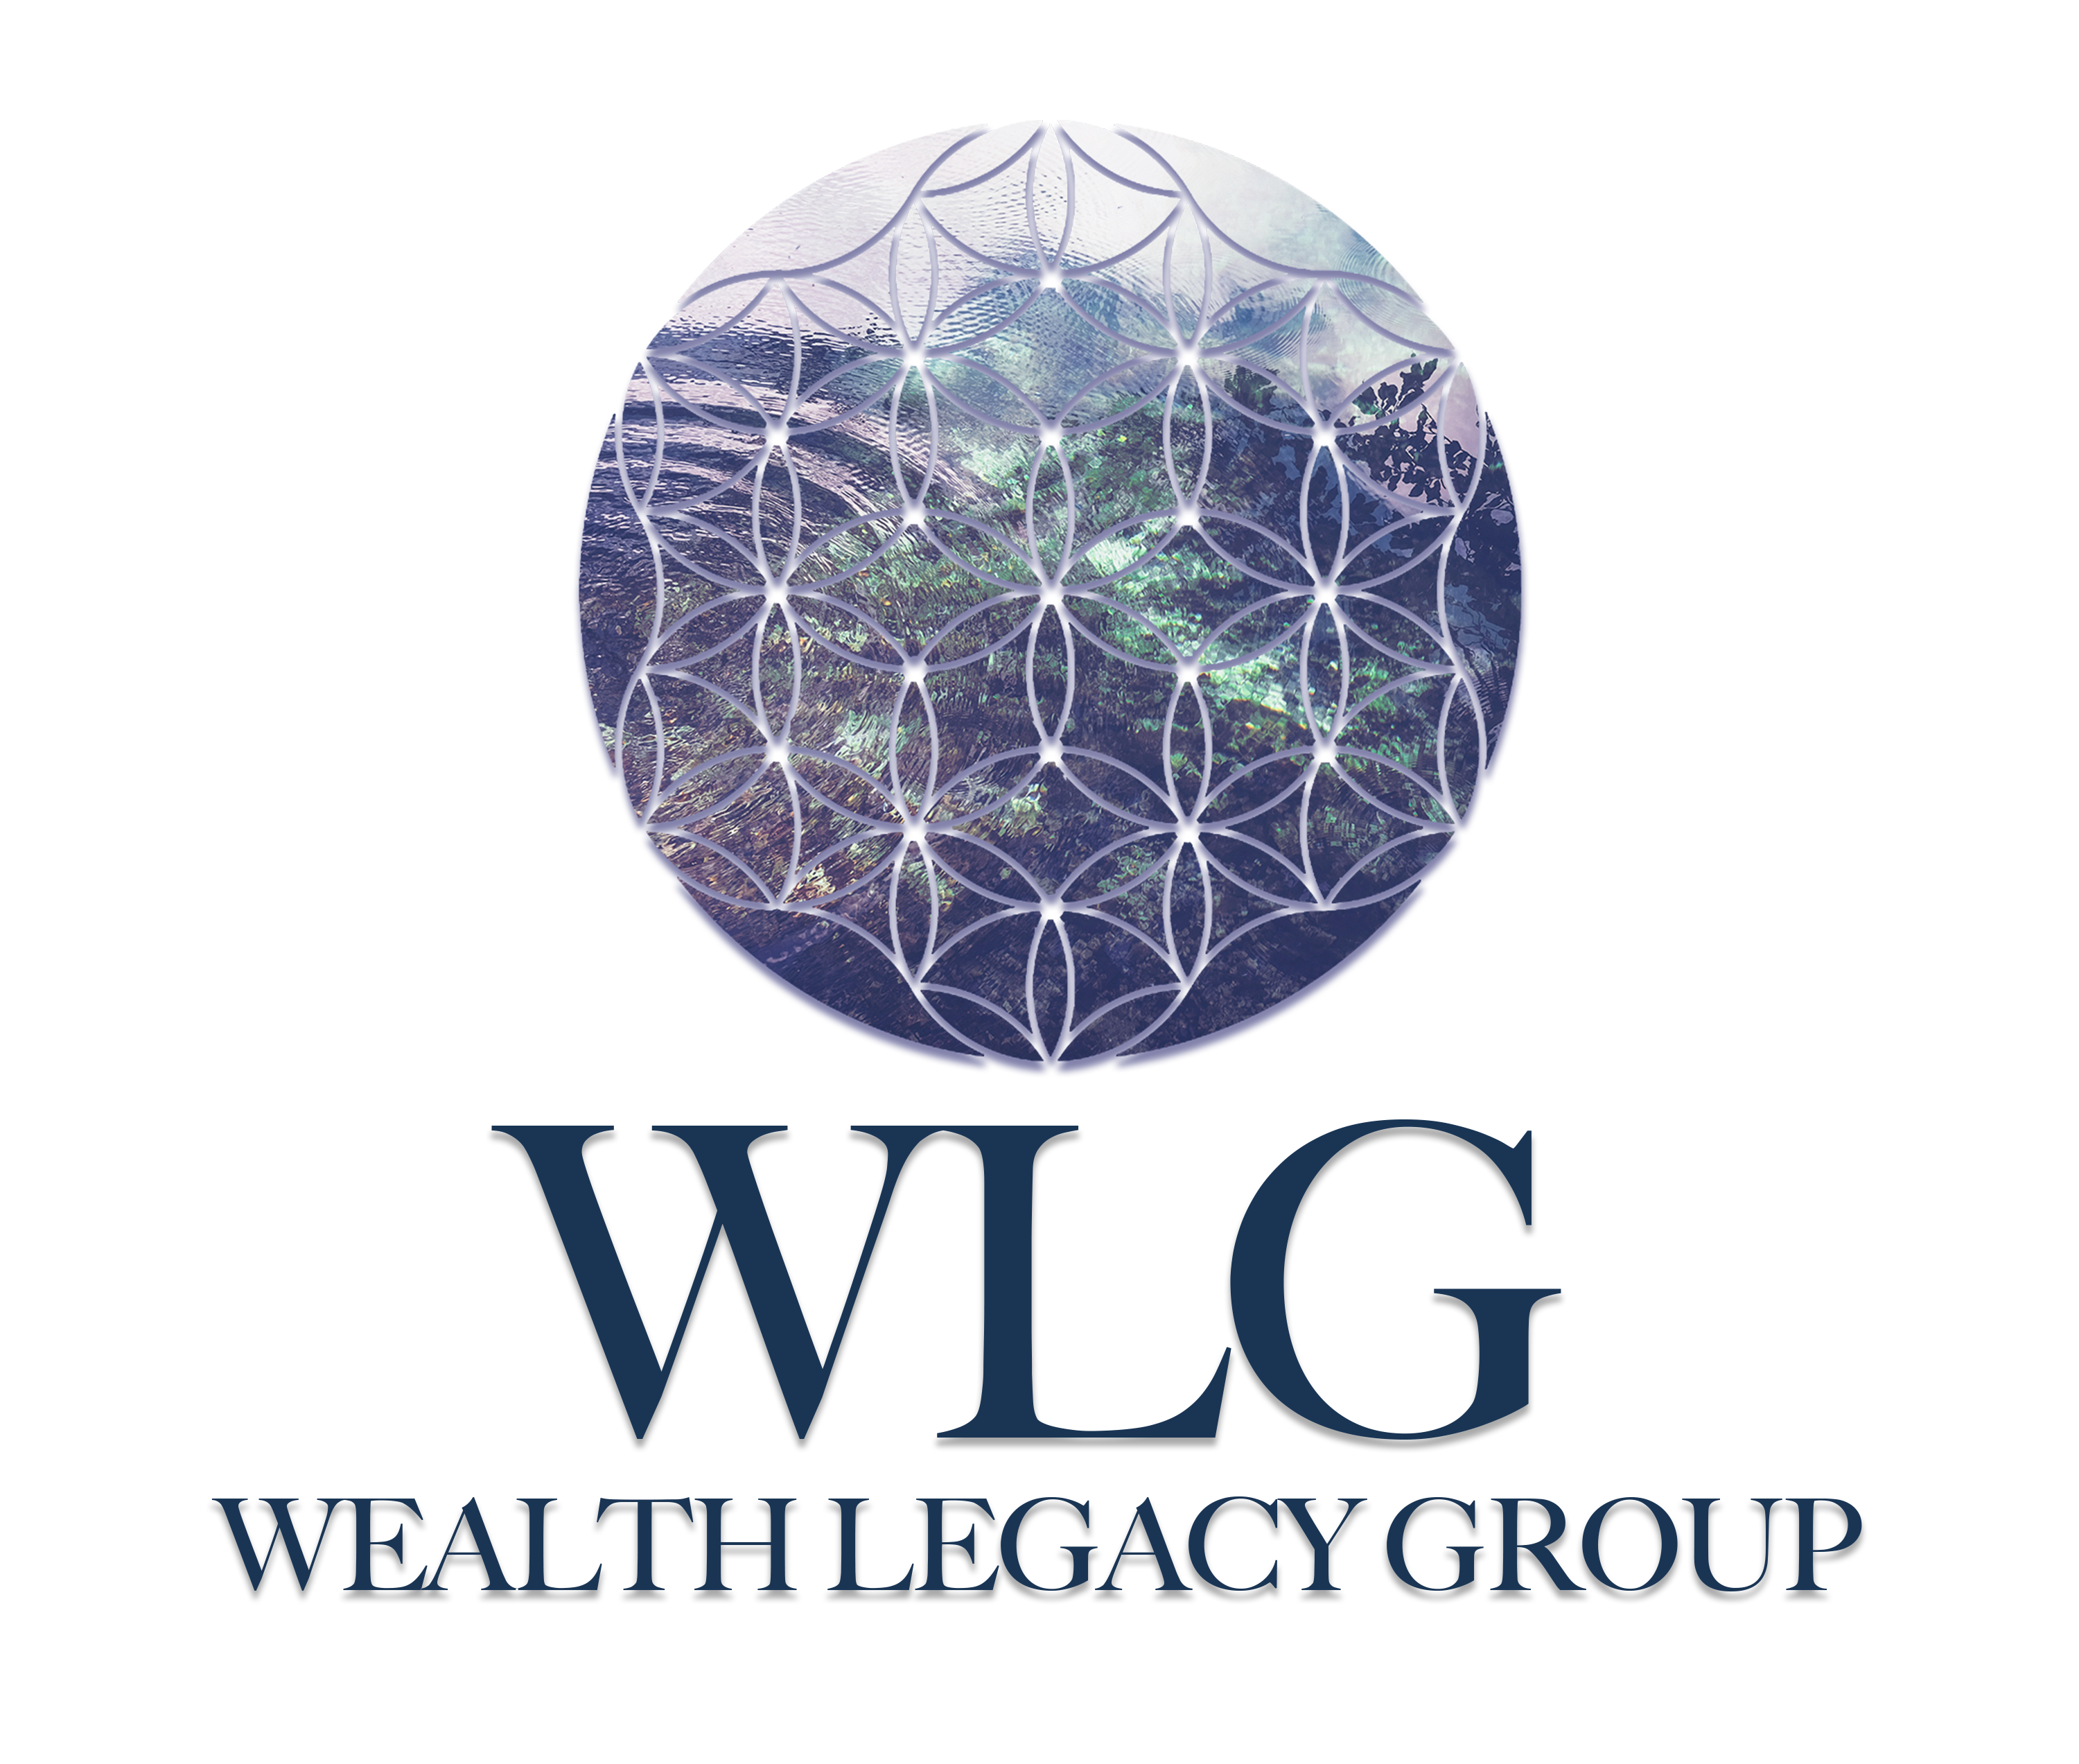 Wealth Legacy Group